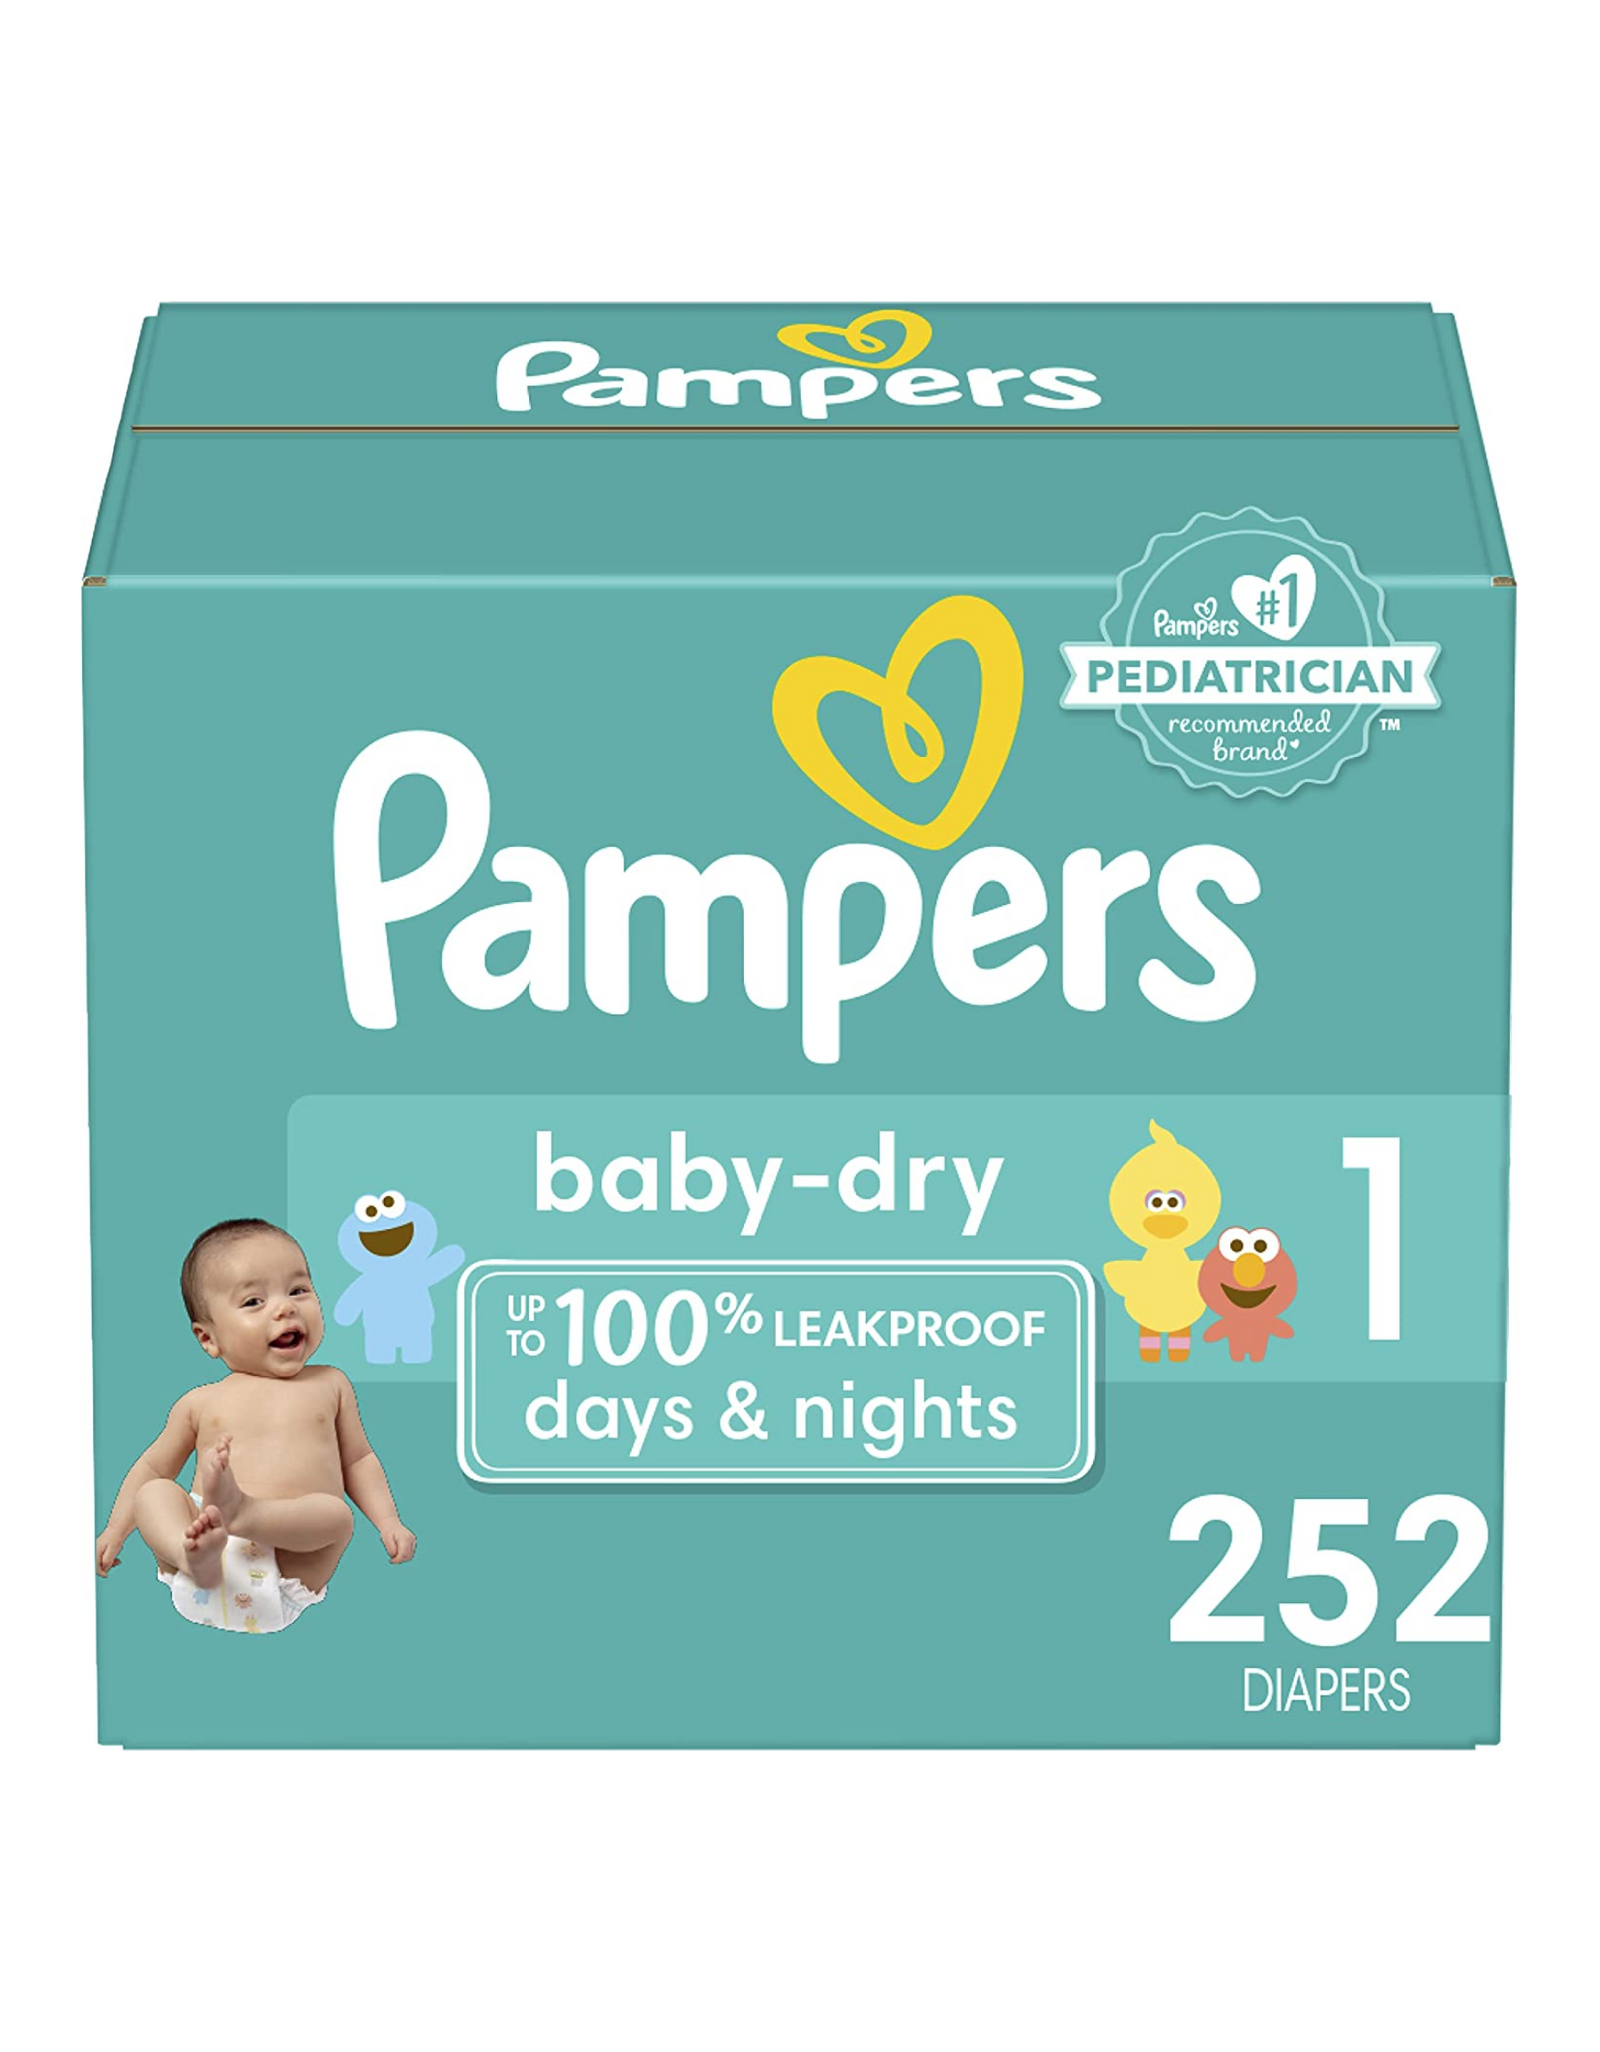 Diapers Newborn/Size 1 (8-14 lb), Pampers Baby Dry Baby Diapers, 252 Ct (Prints & PackagingMay Vary)